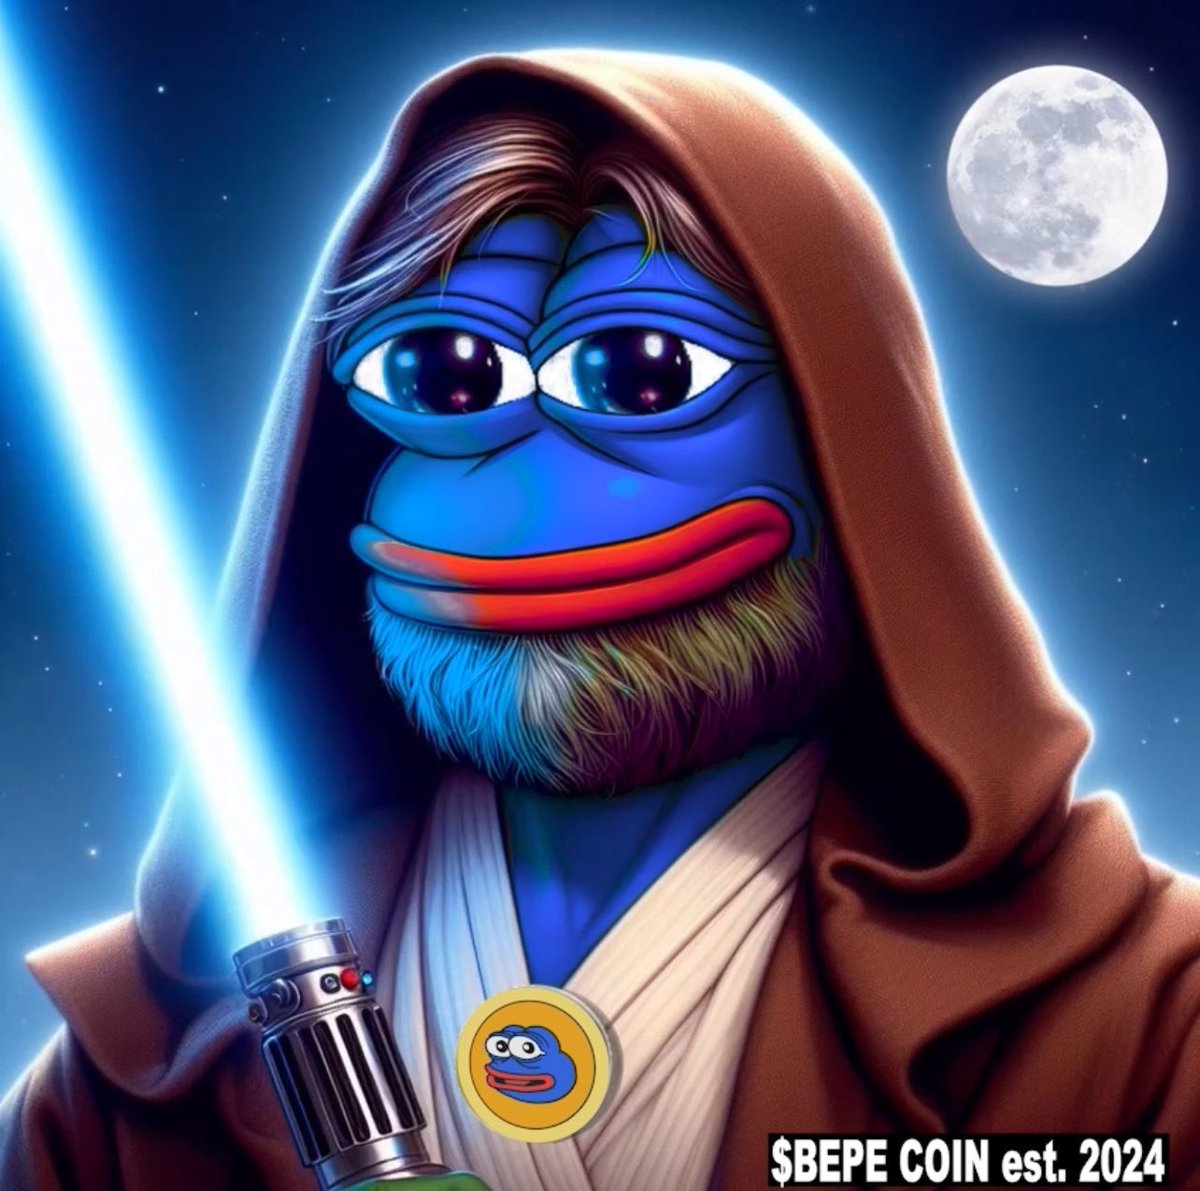 MAY THE 4TH BE WITH YOU. 

ANOTHER BEAUTIFUL DAY IN BEPELAND. 

$BEPE 🔛🔝🔜 🐸

BEPE.LIVE 🚨